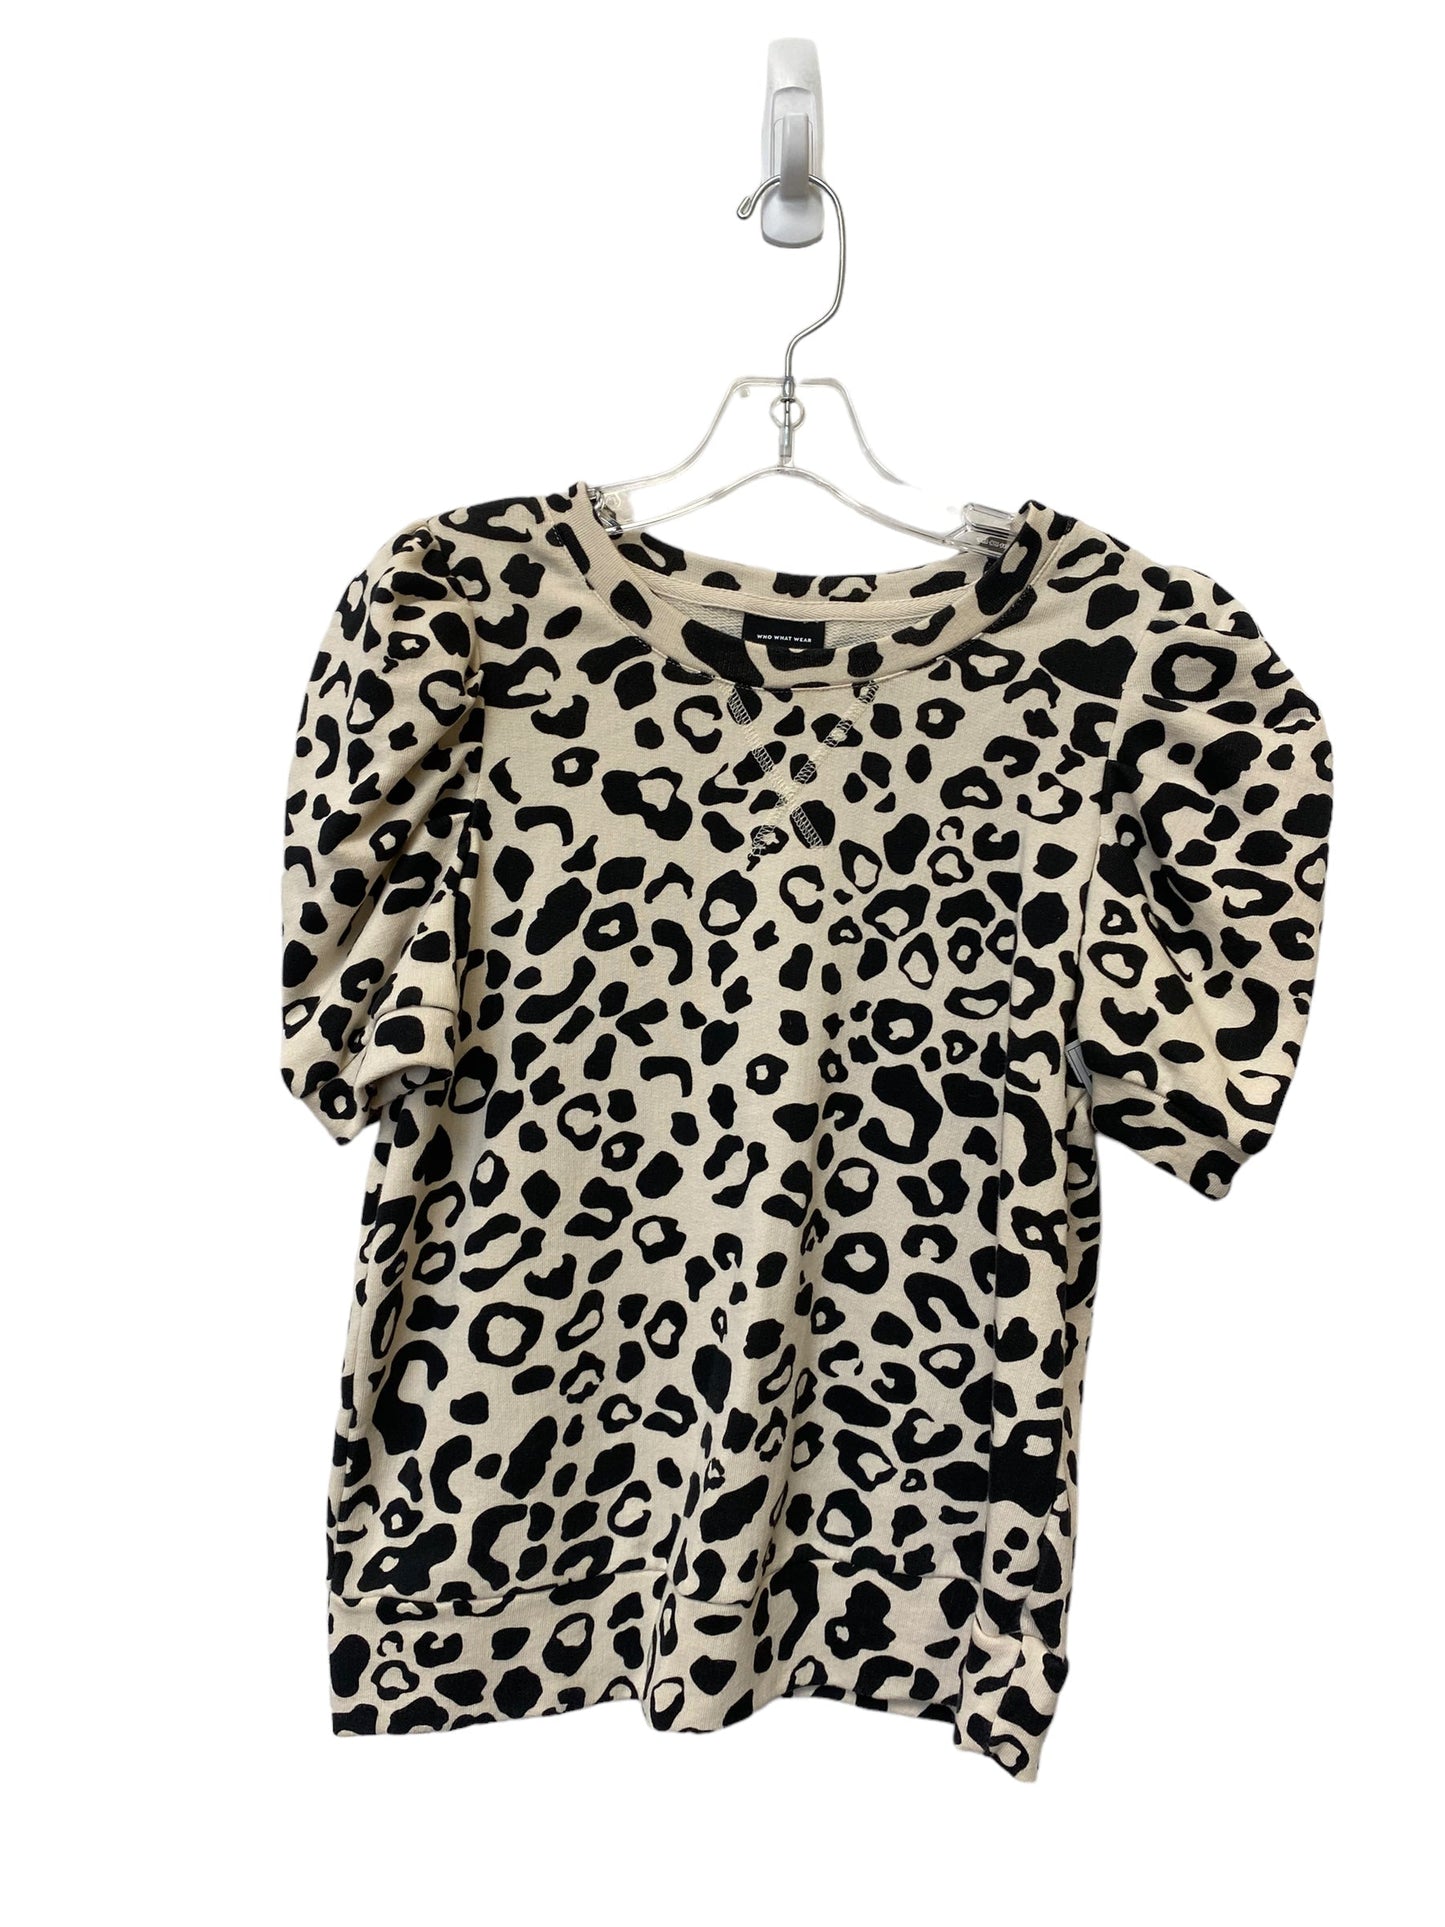 Animal Print Top Short Sleeve Who What Wear, Size S